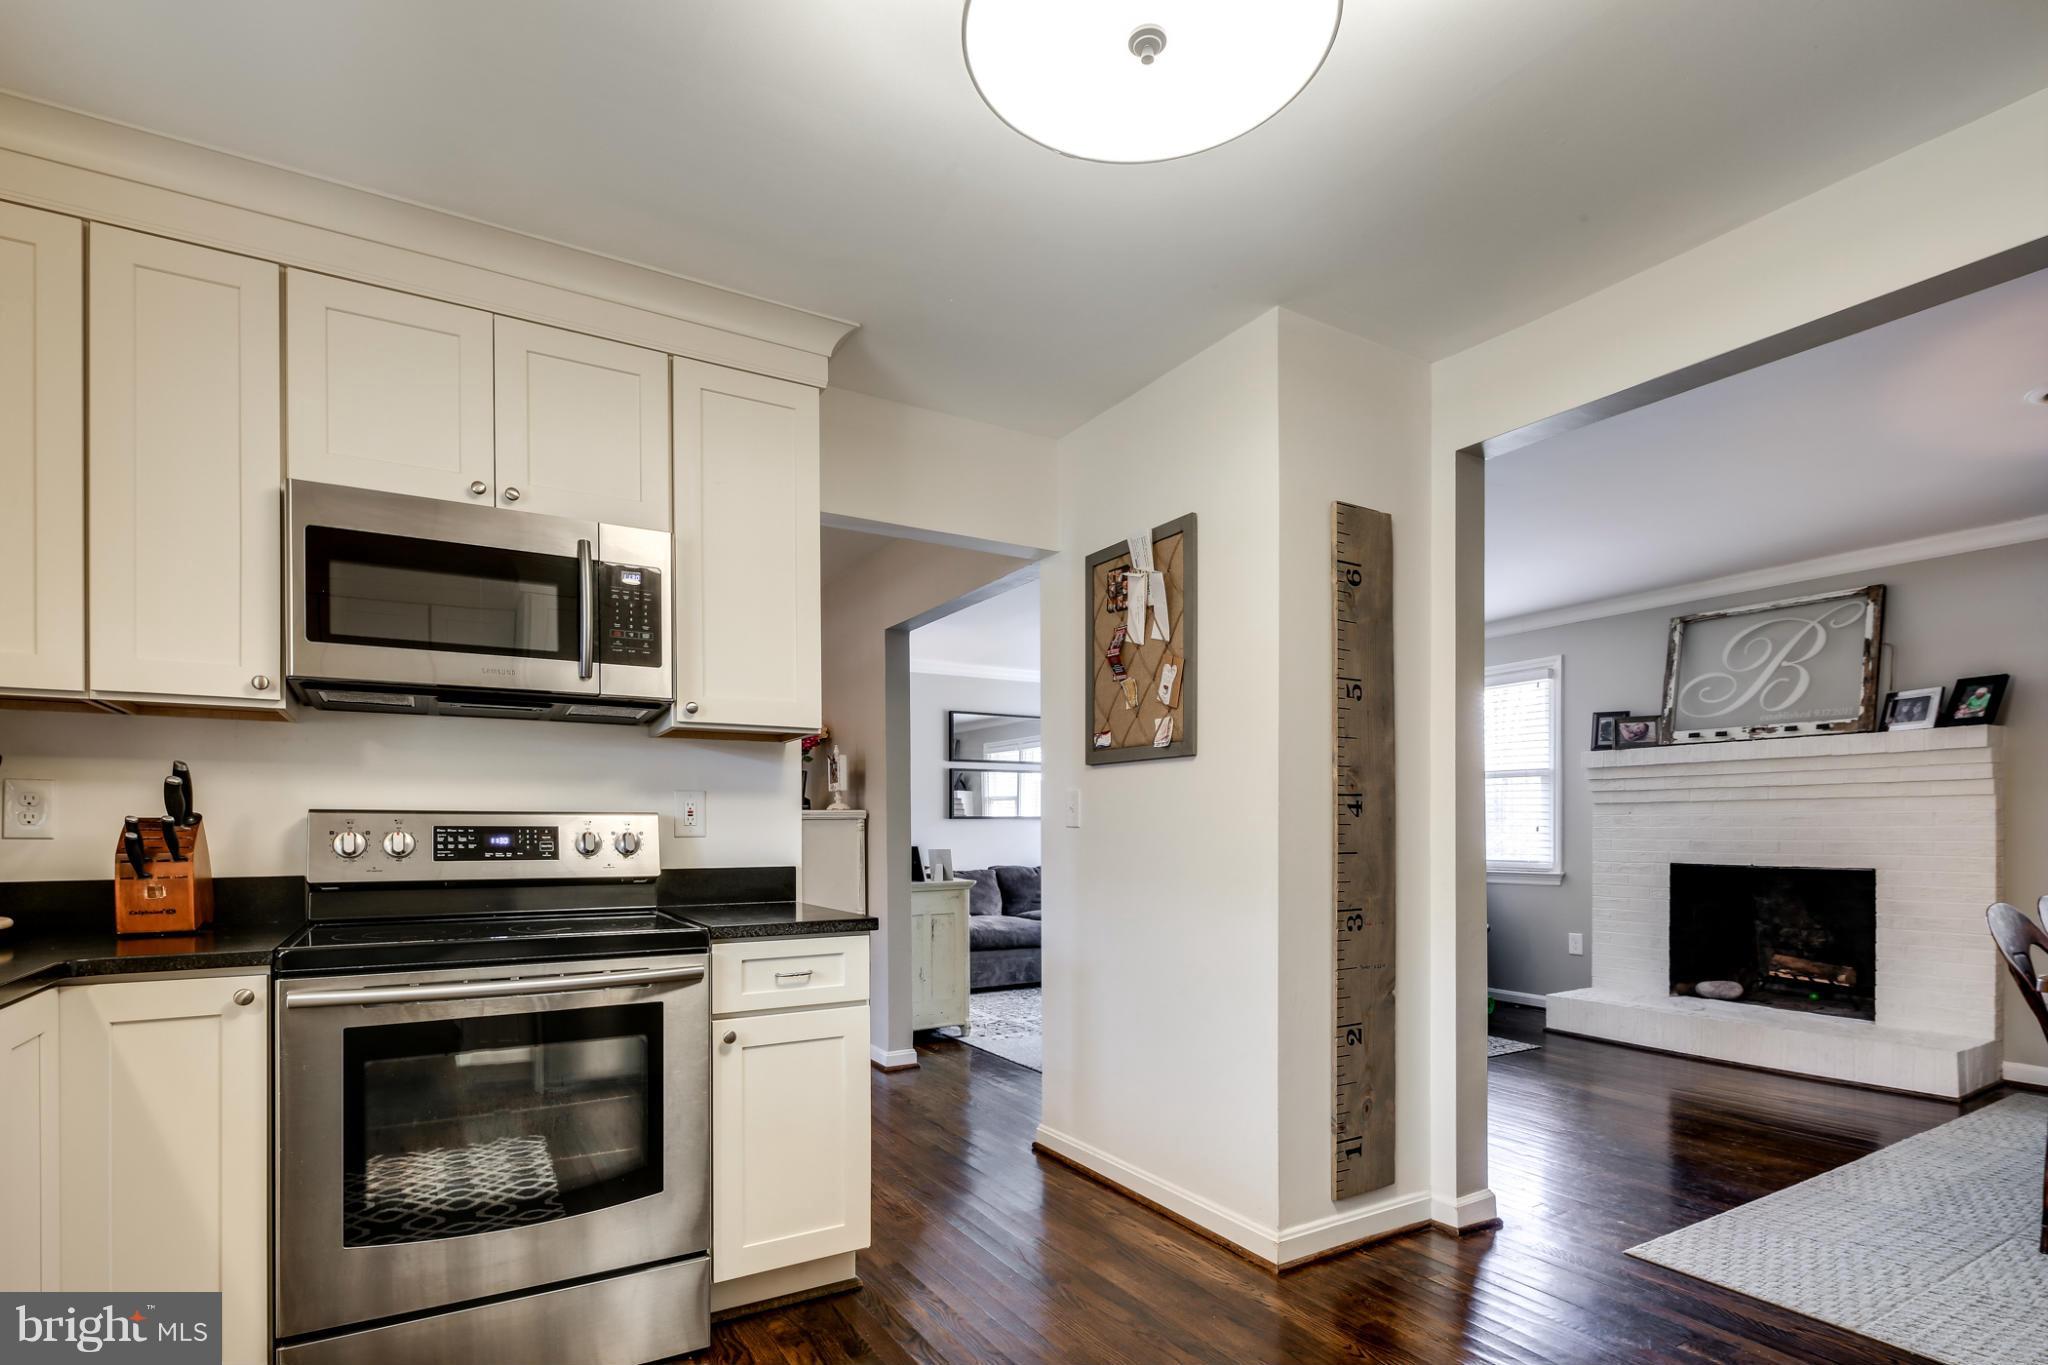 a kitchen with stainless steel appliances granite countertop a stove a microwave and a hard wood floors